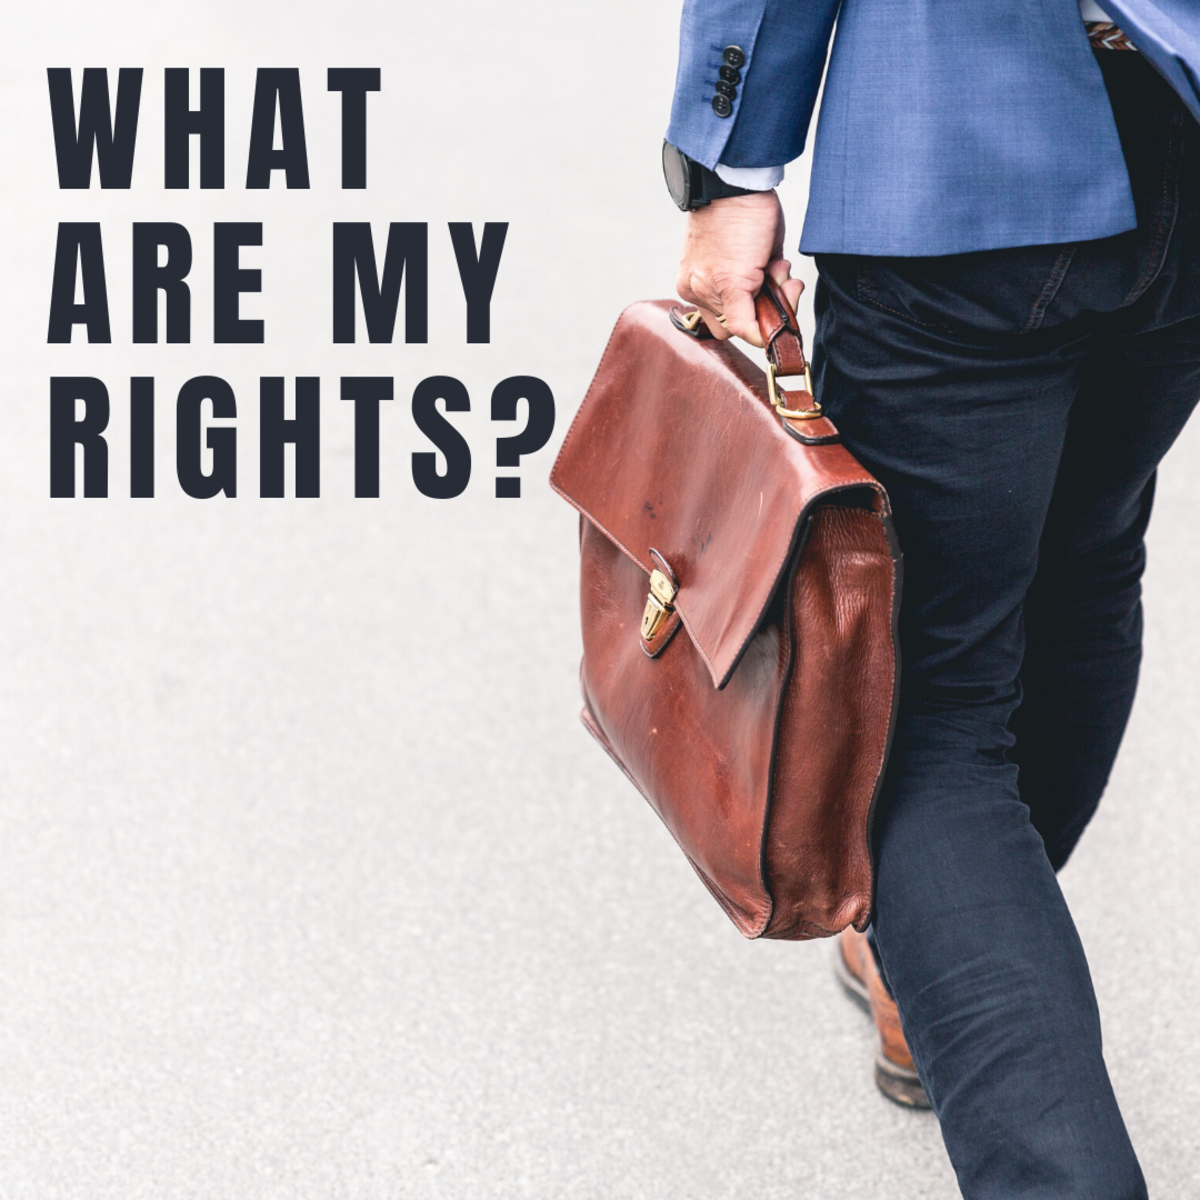 What are my rights?